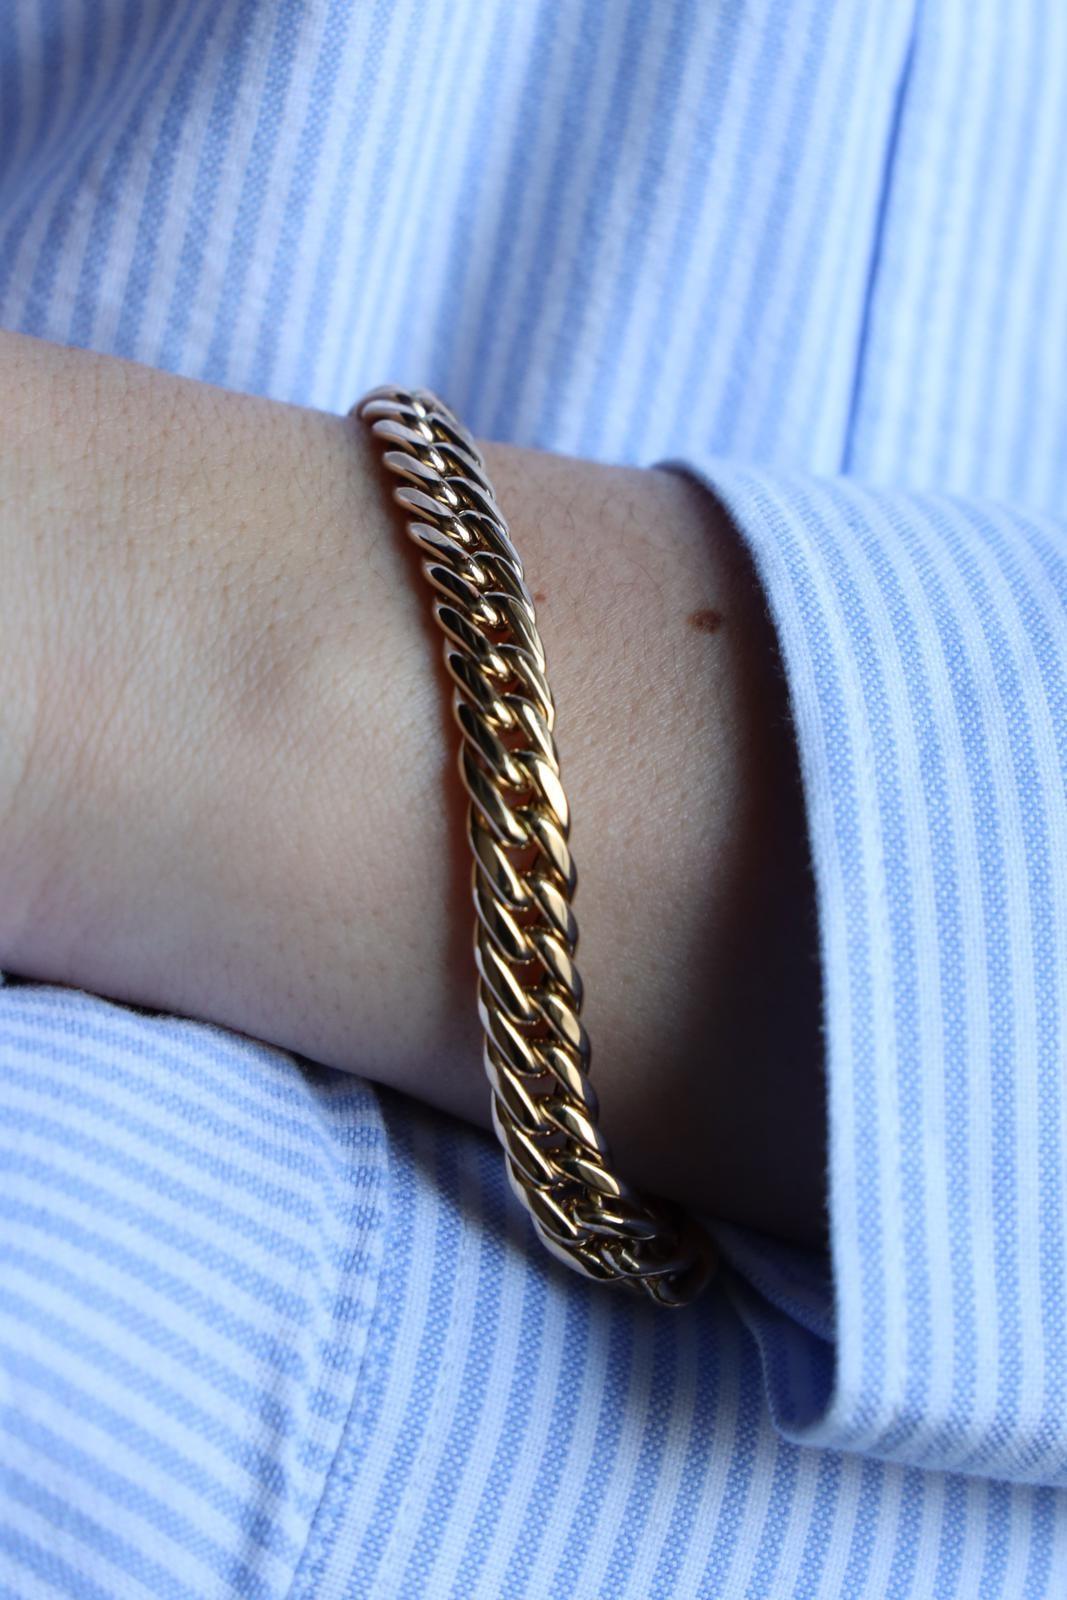 Bracelet in yellow gold 750 thousandths (18 carats). American mesh. length: 19.50 cm. width: 0.70 cm. clasp with eight security. total weight: 19.27 g. eagle head punch. excellent condition